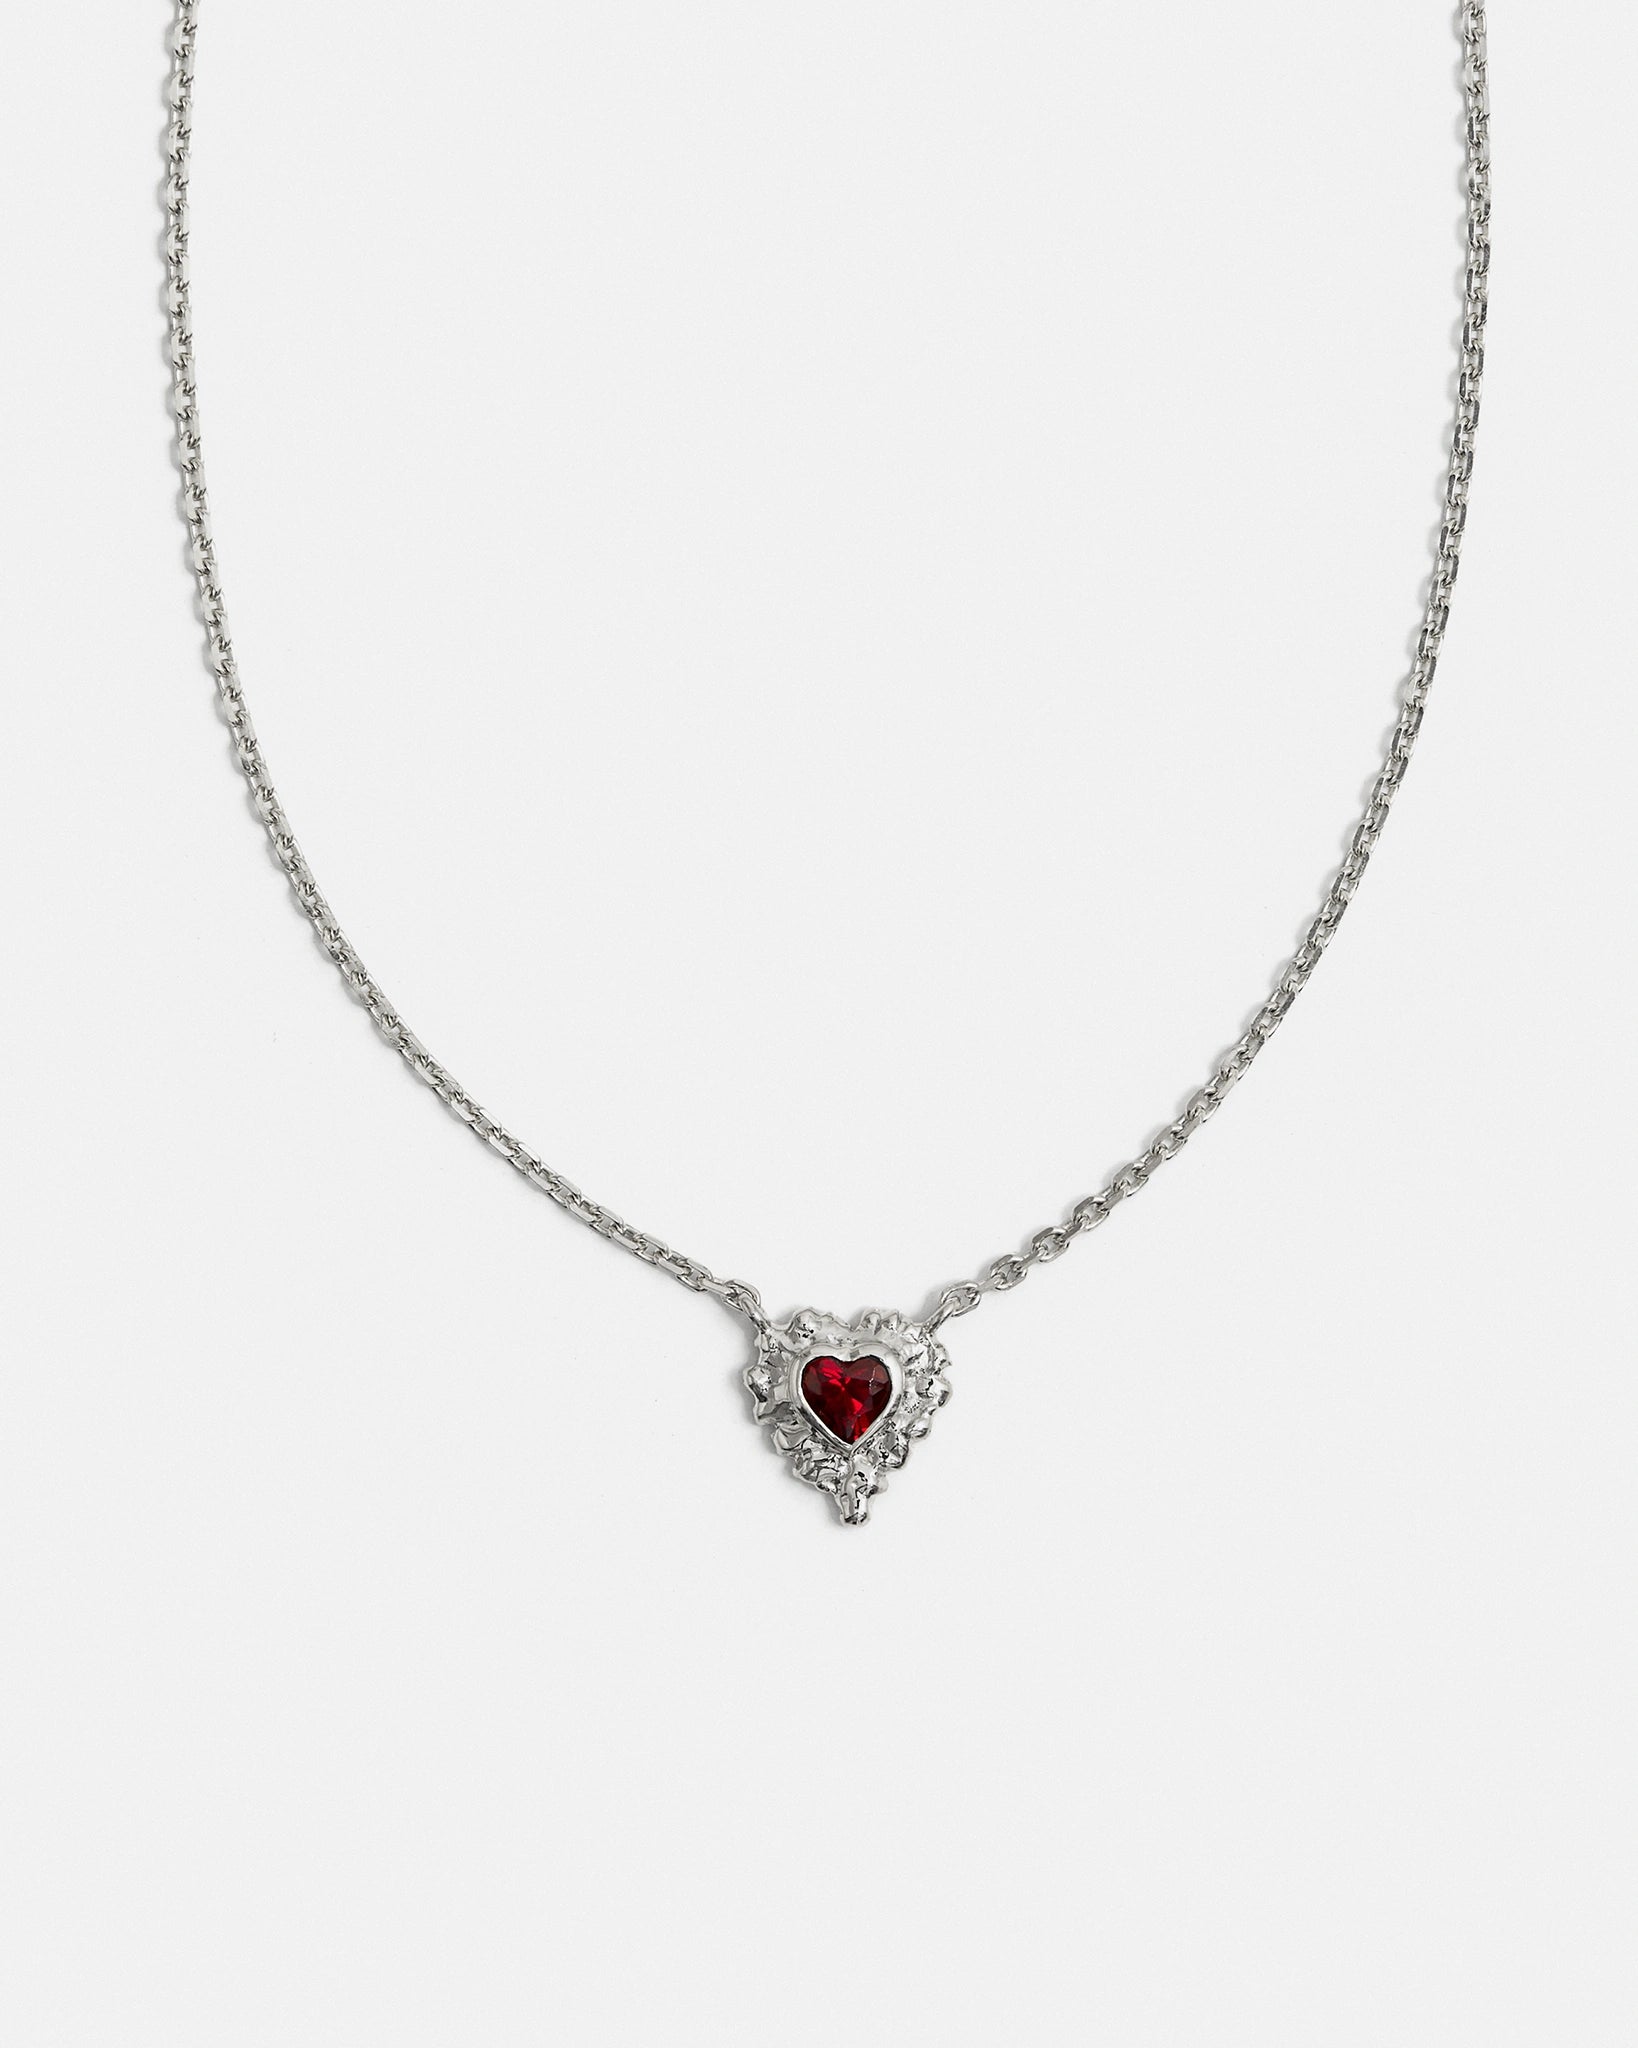 Coup de Foudre Necklace in Silver with Garnet